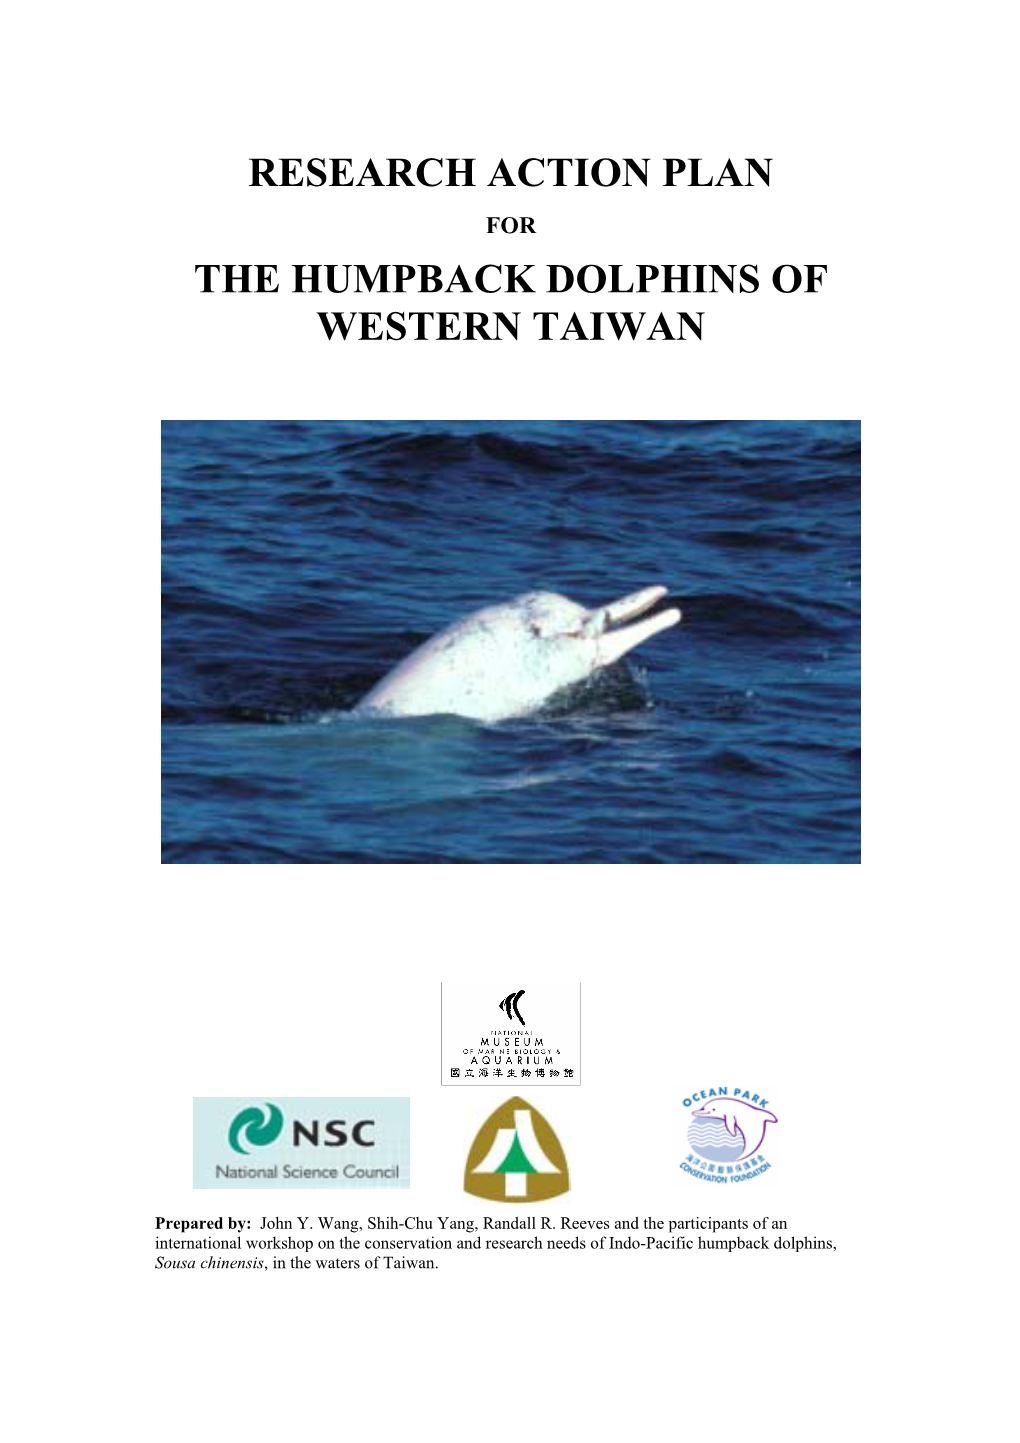 Research Action Plan the Humpback Dolphins of Western Taiwan